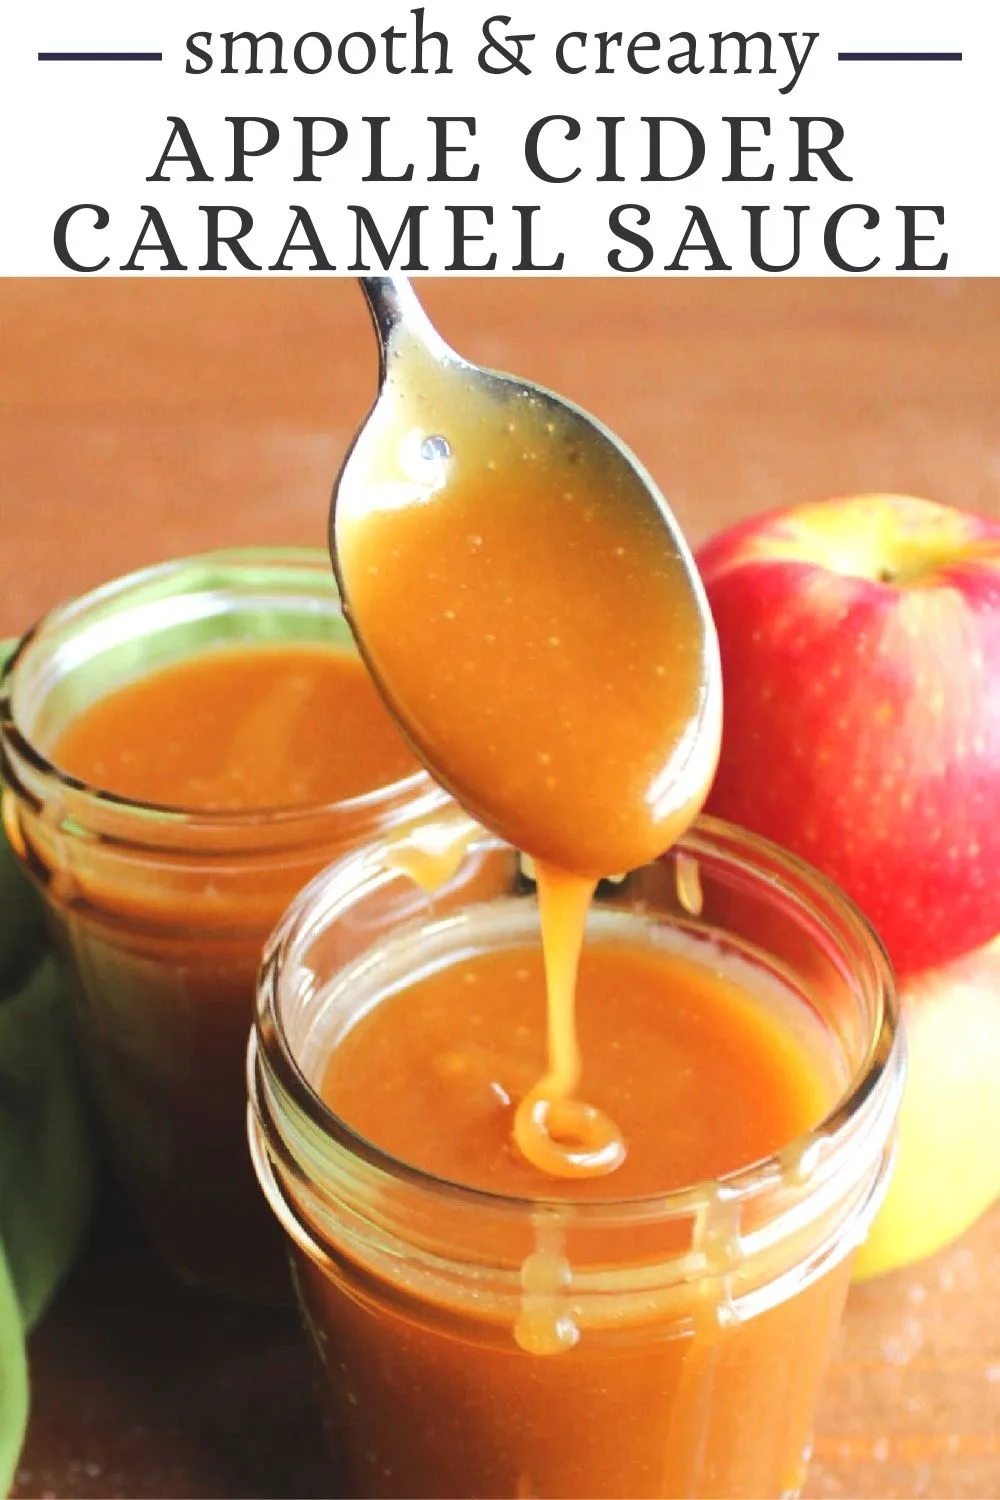 This delicious caramel sauce is kissed with apple cider. You are not going to believe the flavor it gives. Perfect for drizzling over cake, ice cream, waffles, apples or eaten off a spoon!